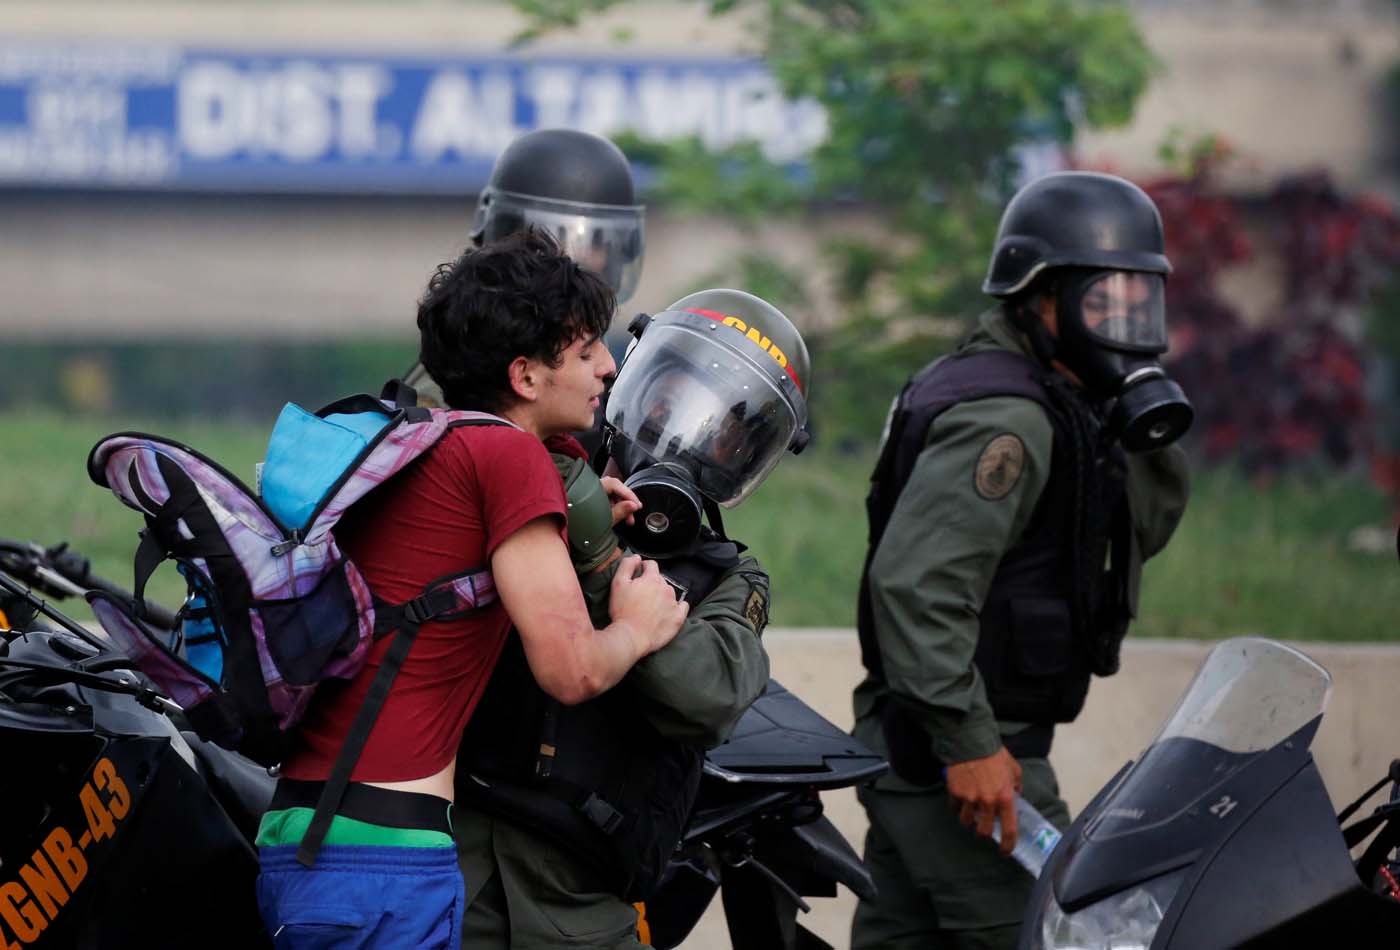 An opposition supporter is detained by riot police during a rally against Venezuelan President Nicolas Maduro in Caracas, Venezuela, May 8, 2017. REUTERS/Carlos Garcia Rawlins